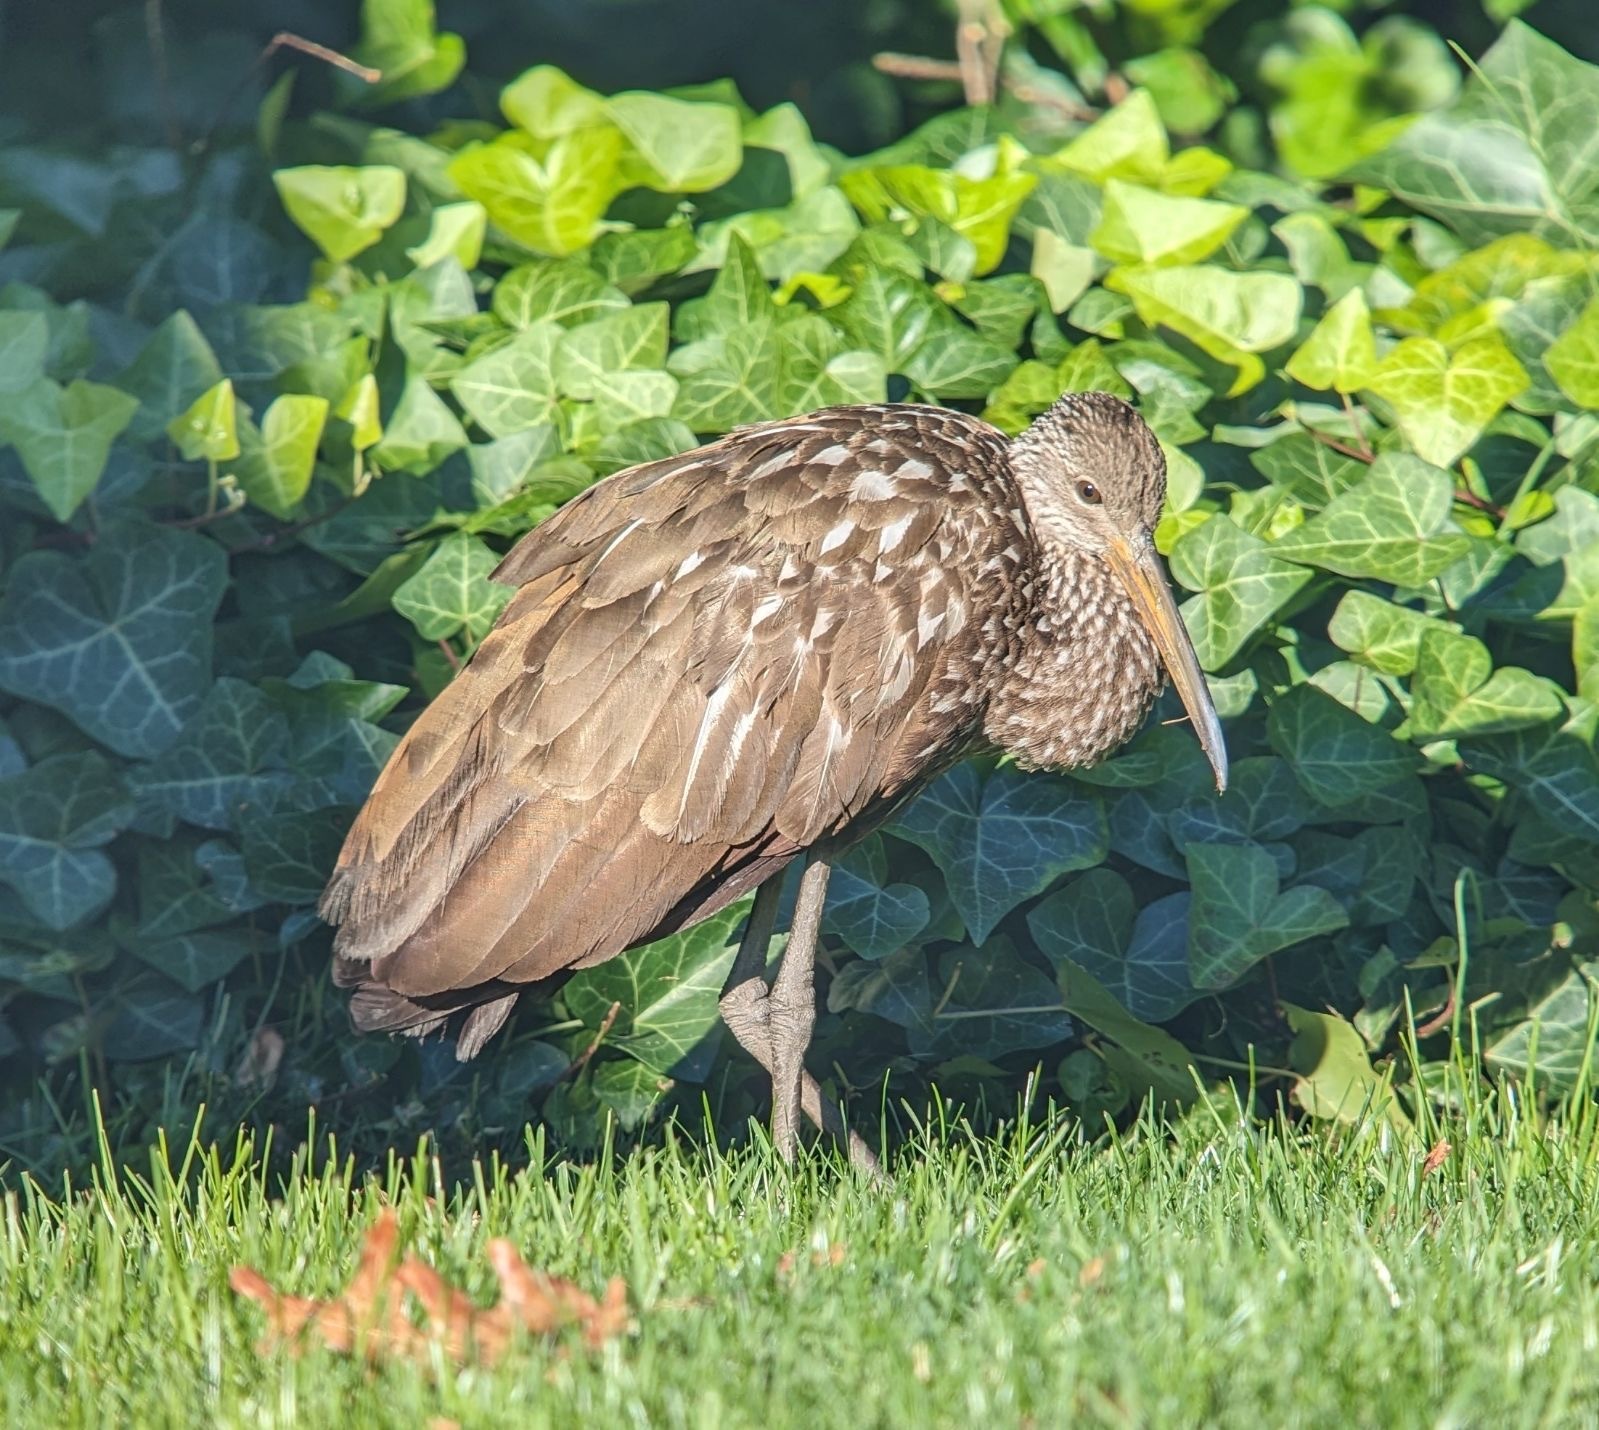 Limpkin bird spotted in N.J. for the first time, experts say - nj.com